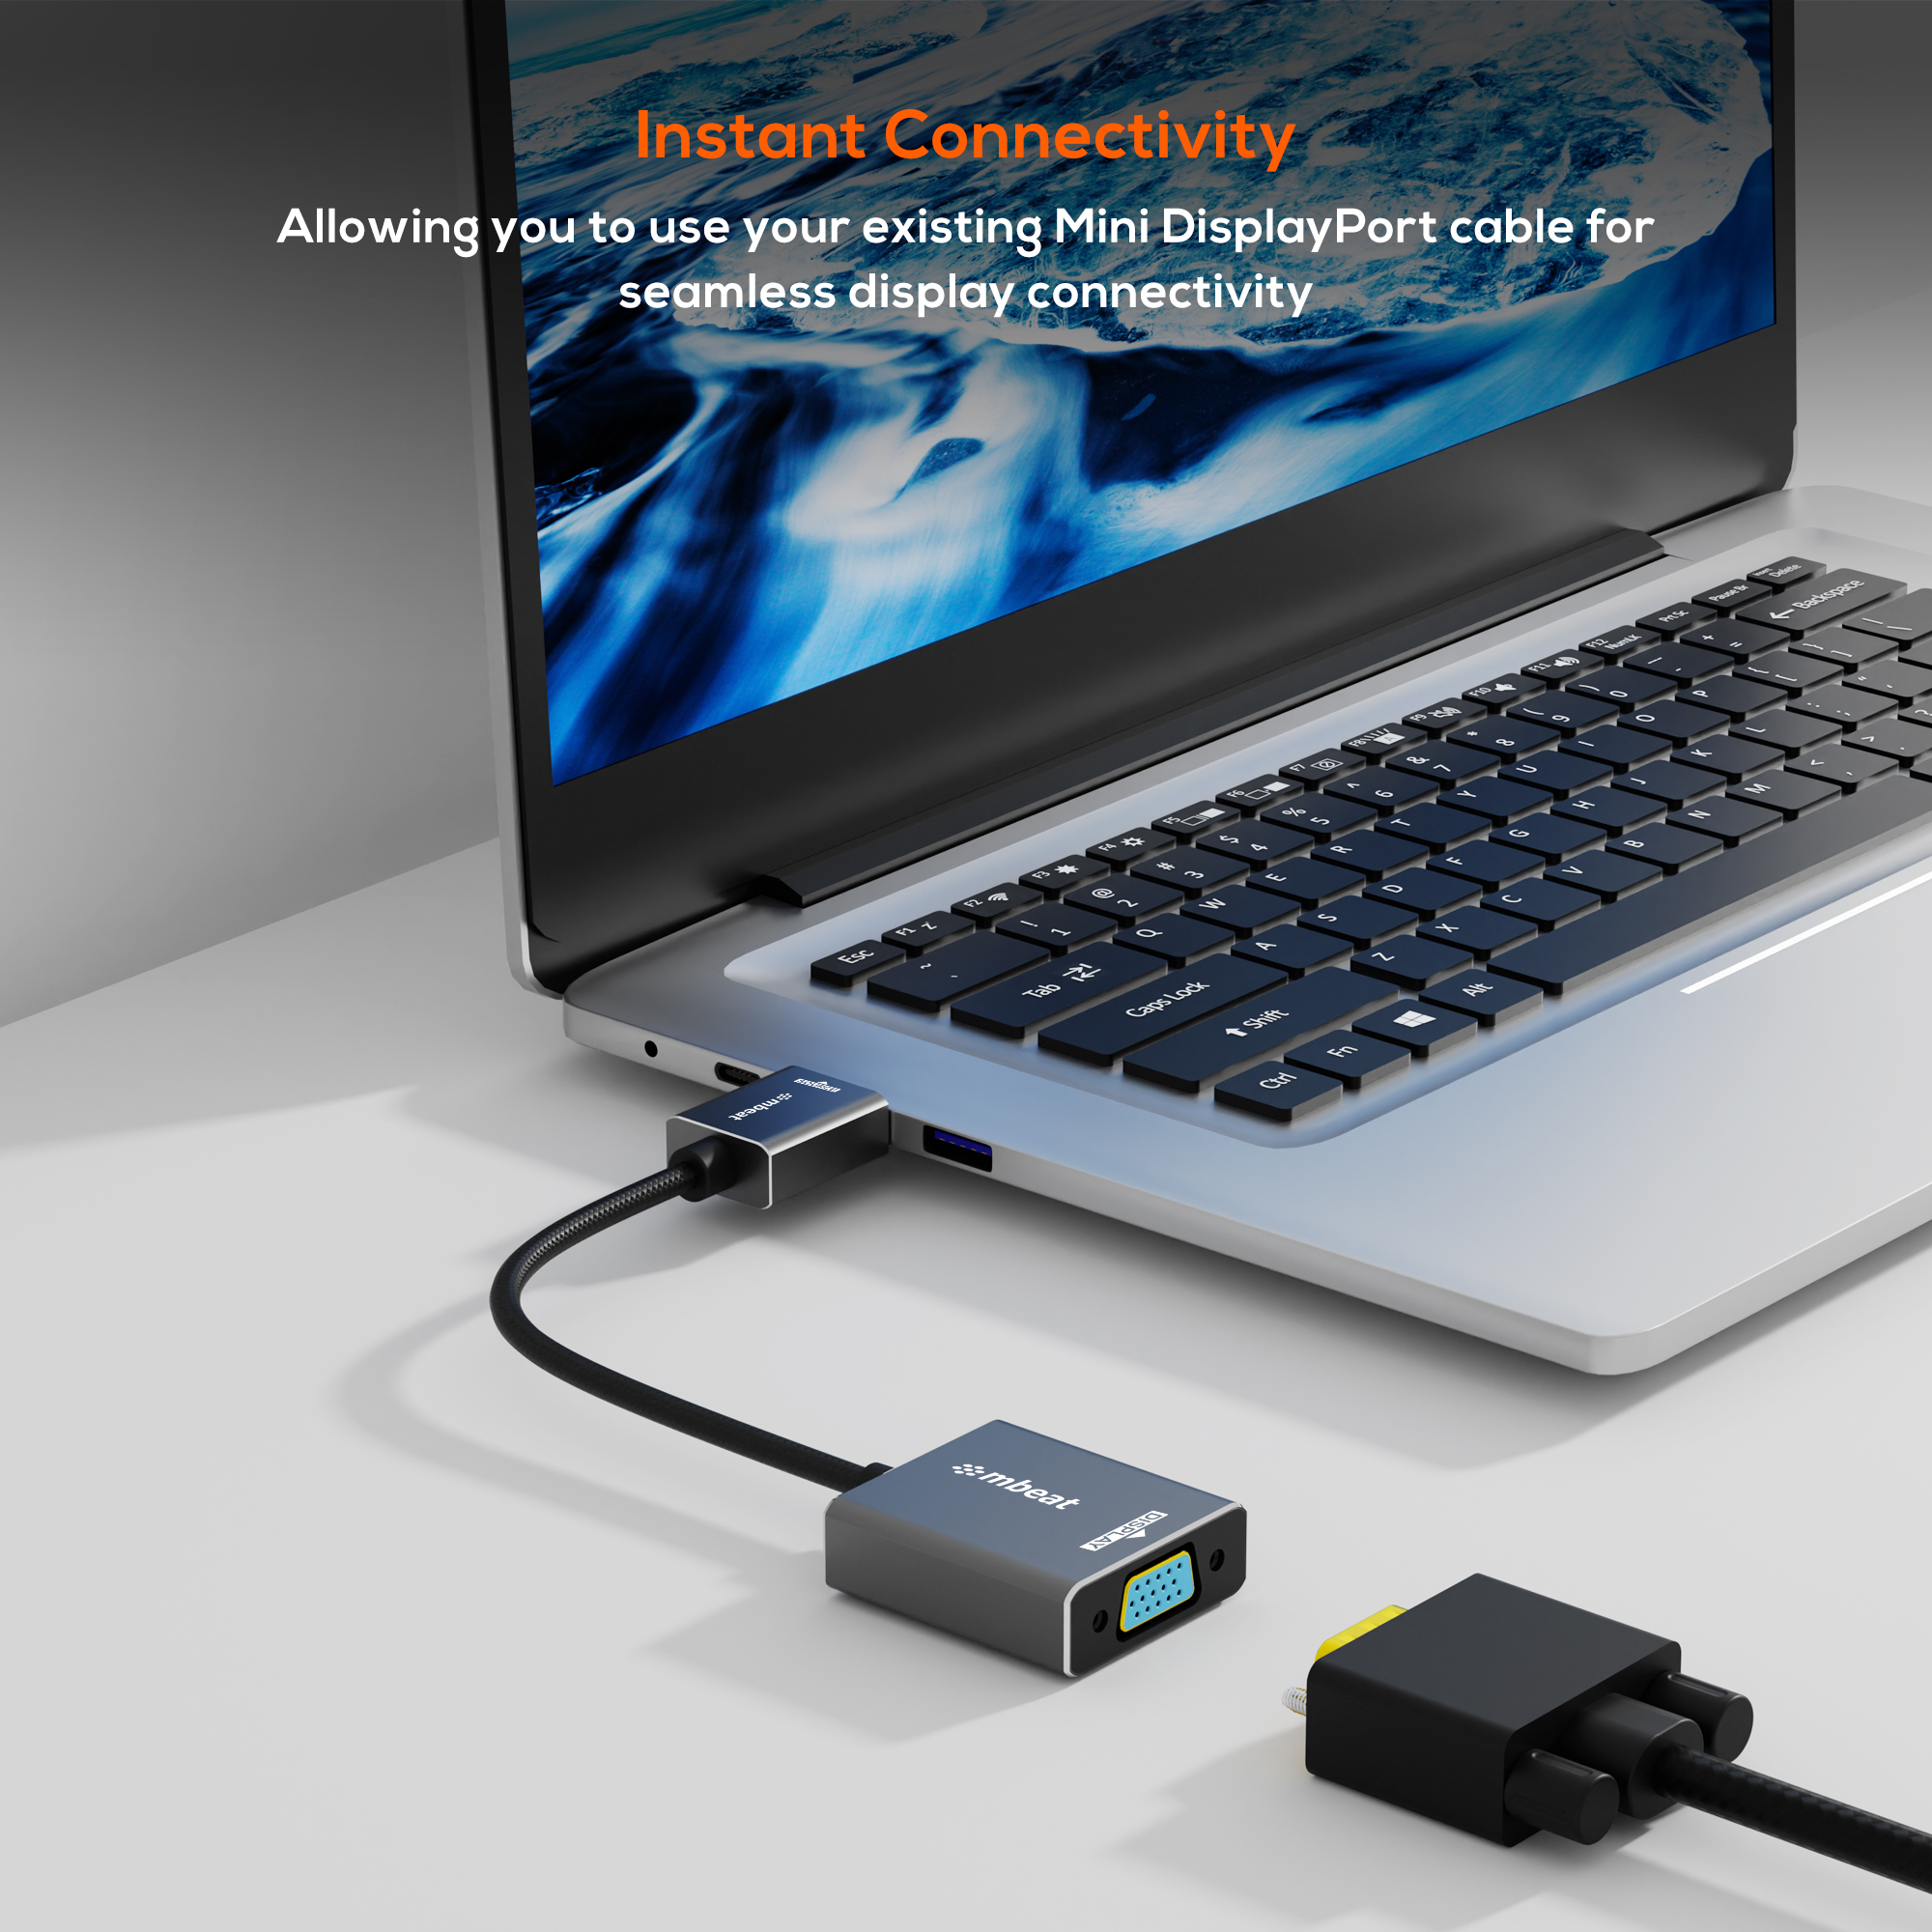 A large marketing image providing additional information about the product mbeat Tough Link HDMI to VGA Adapter - Additional alt info not provided